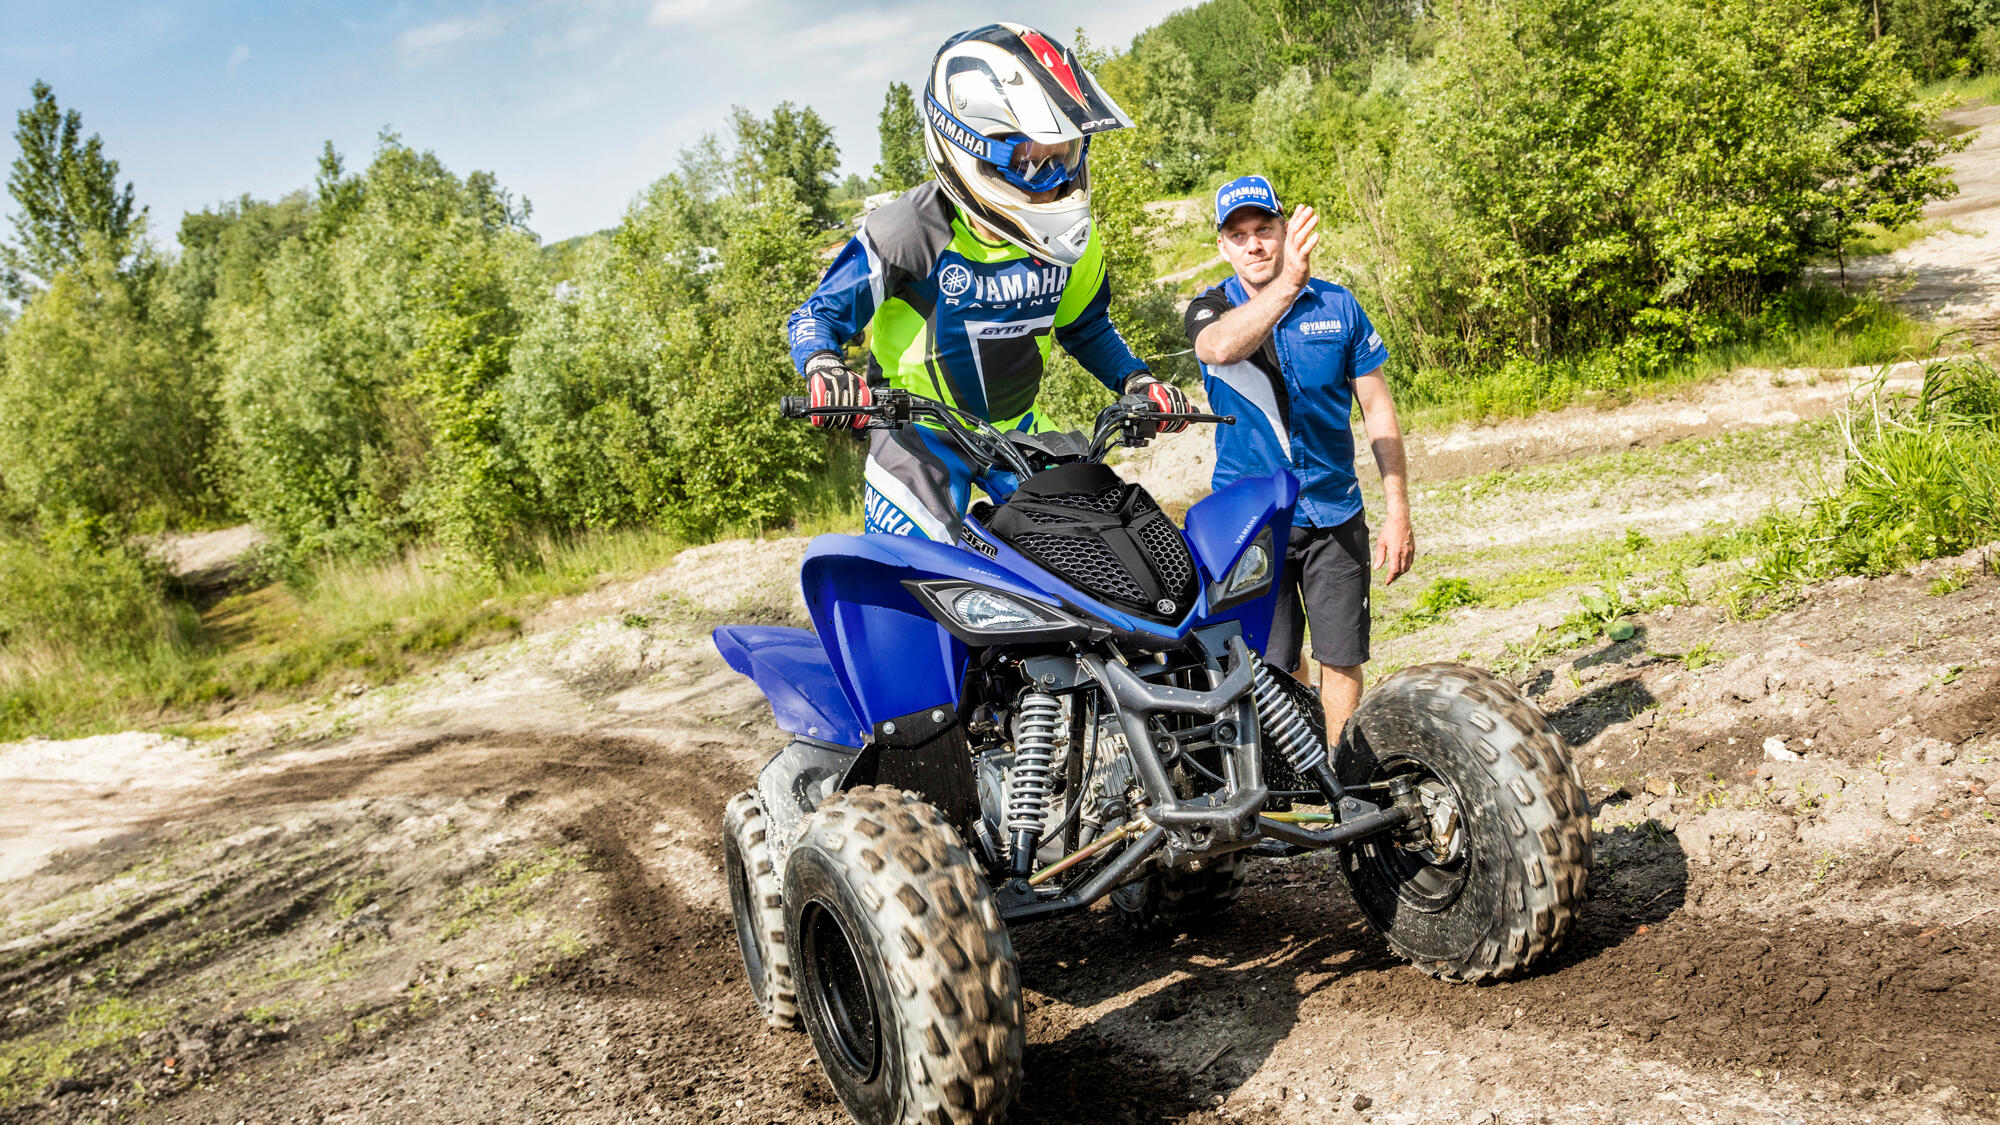 A view of the Yamaha Land Access Program via the Outdoors Initiative, where funding goes into trails created for recreational use